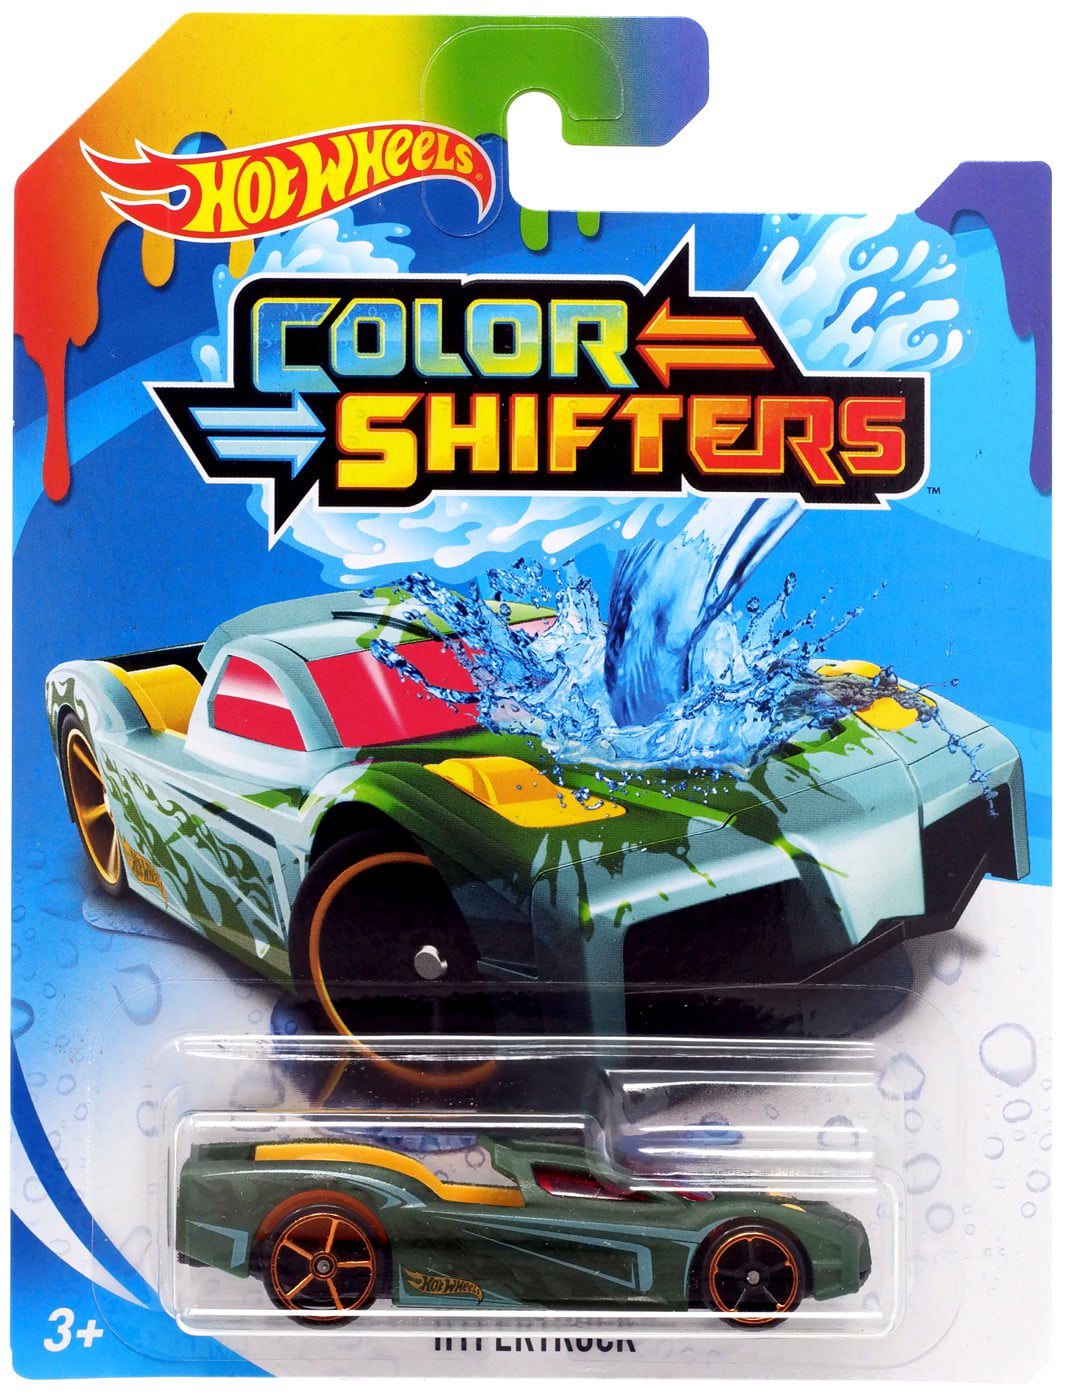 Hot Wheels COLOR SHIFTERS Color Changing 1:64 Choose From 38 Cars 1/10/2021 